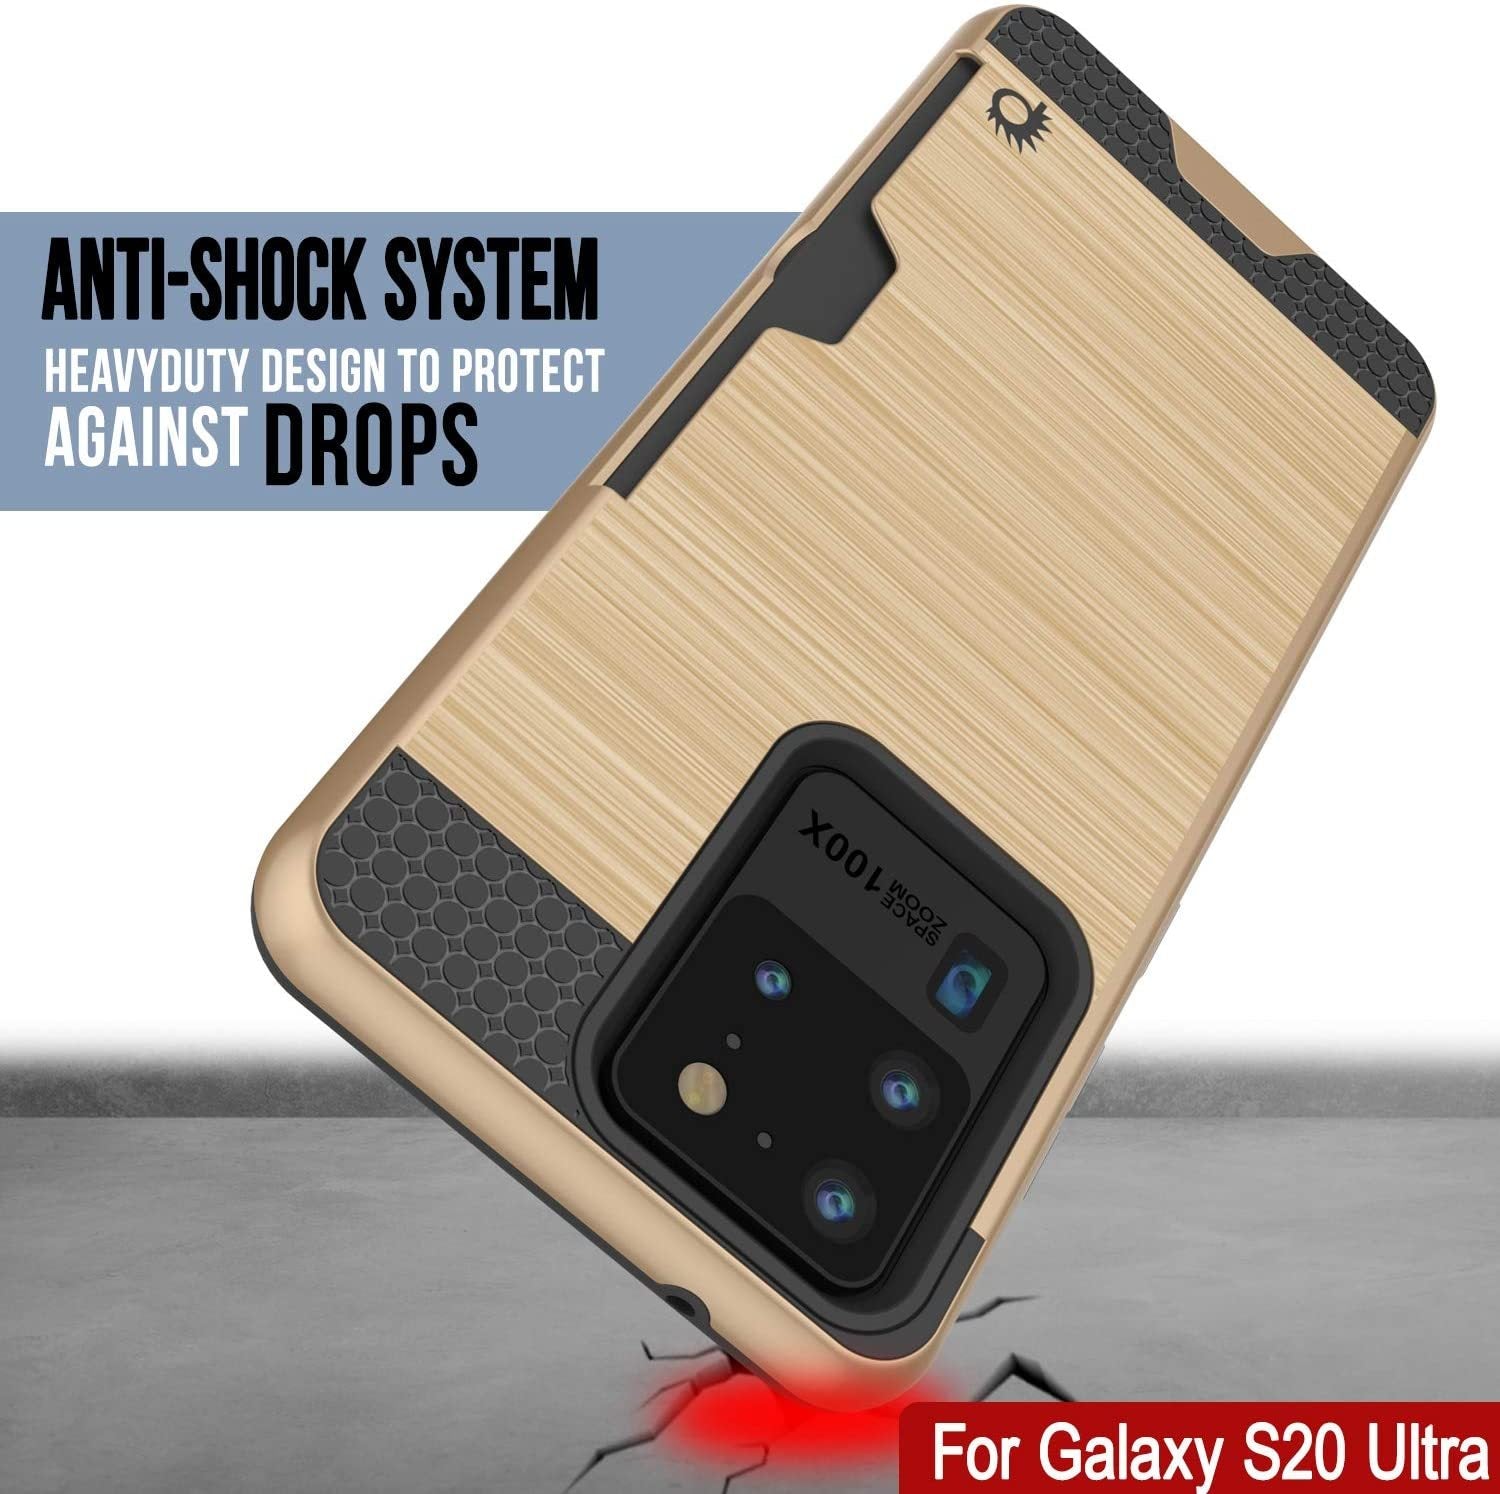 Galaxy S20 Ultra Case, PUNKcase [SLOT Series] [Slim Fit] Dual-Layer Armor Cover w/Integrated Anti-Shock System, Credit Card Slot [Gold]